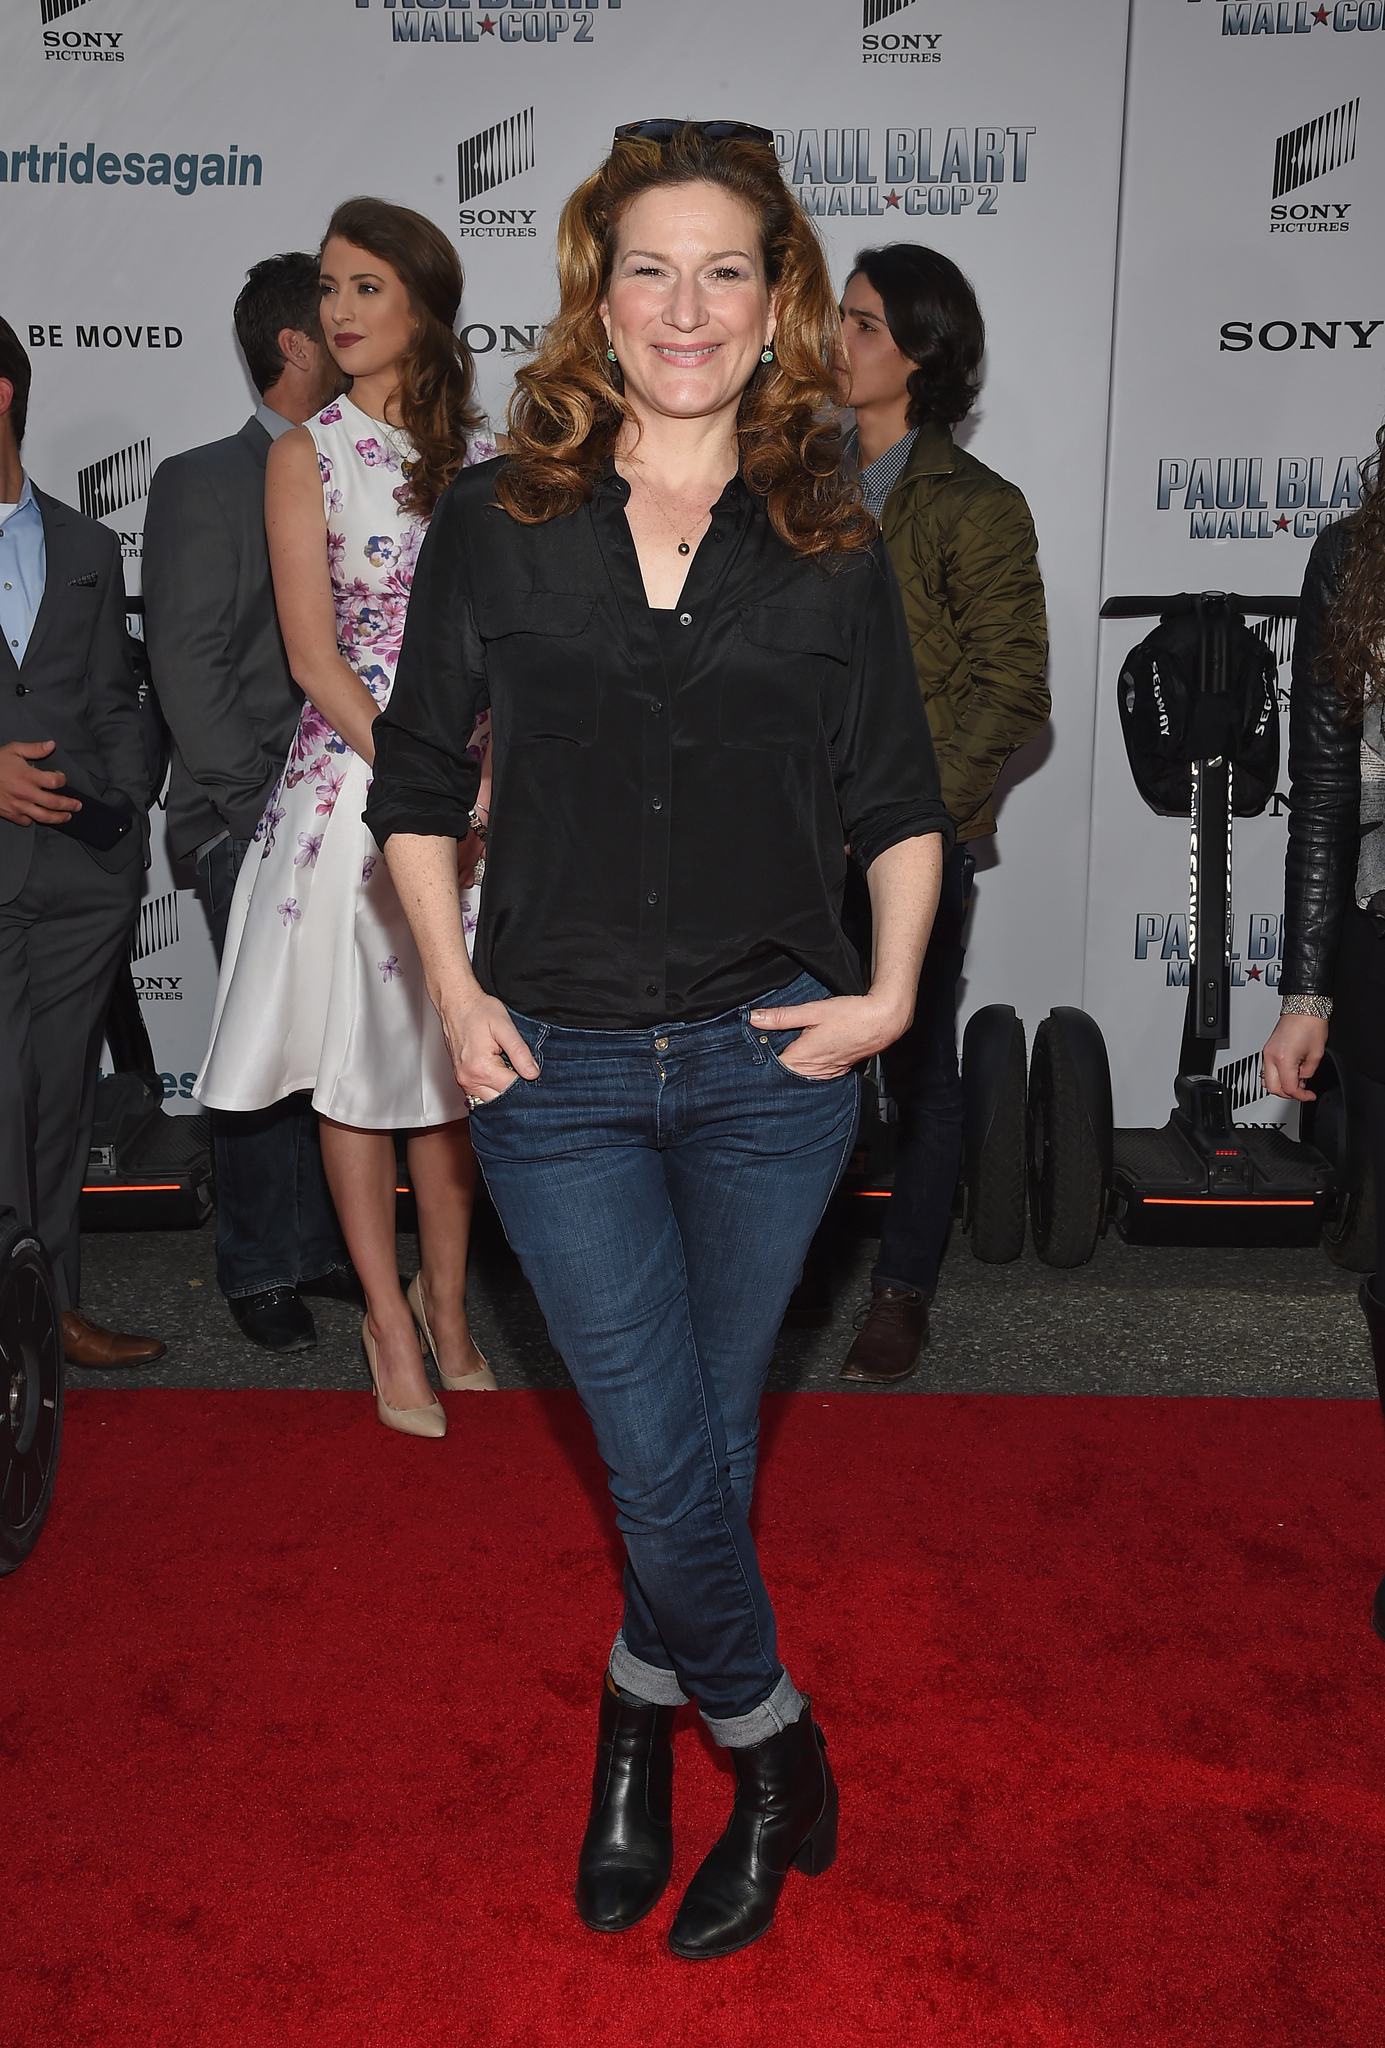 Ana Gasteyer at event of Paul Blart: Mall Cop 2 (2015)